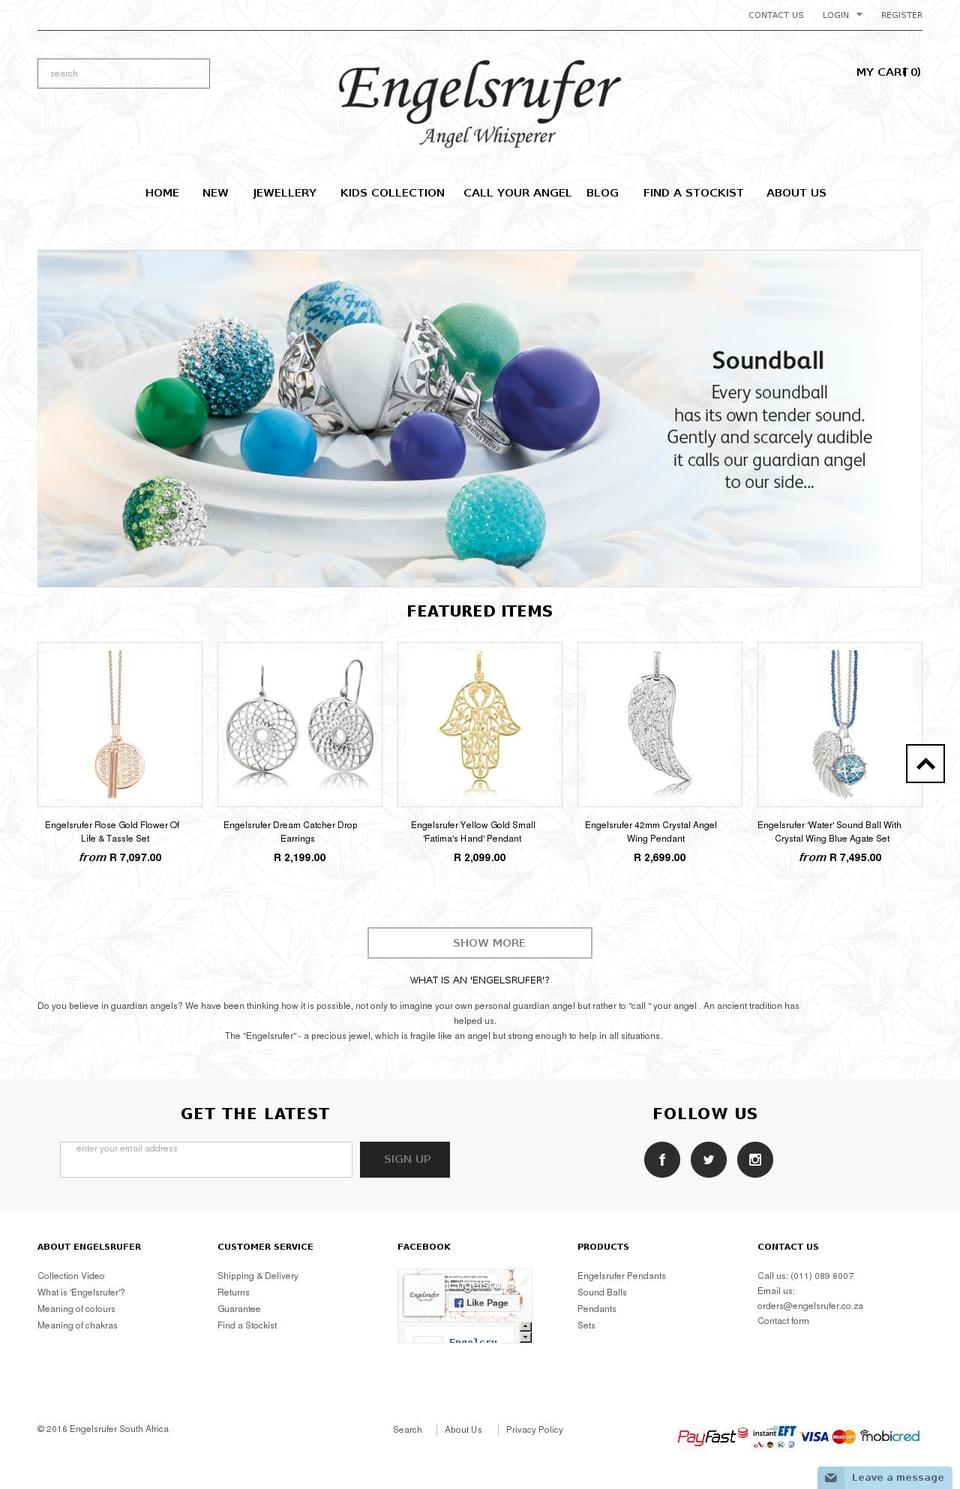 Halo Shopify theme site example engelsrufer.co.za